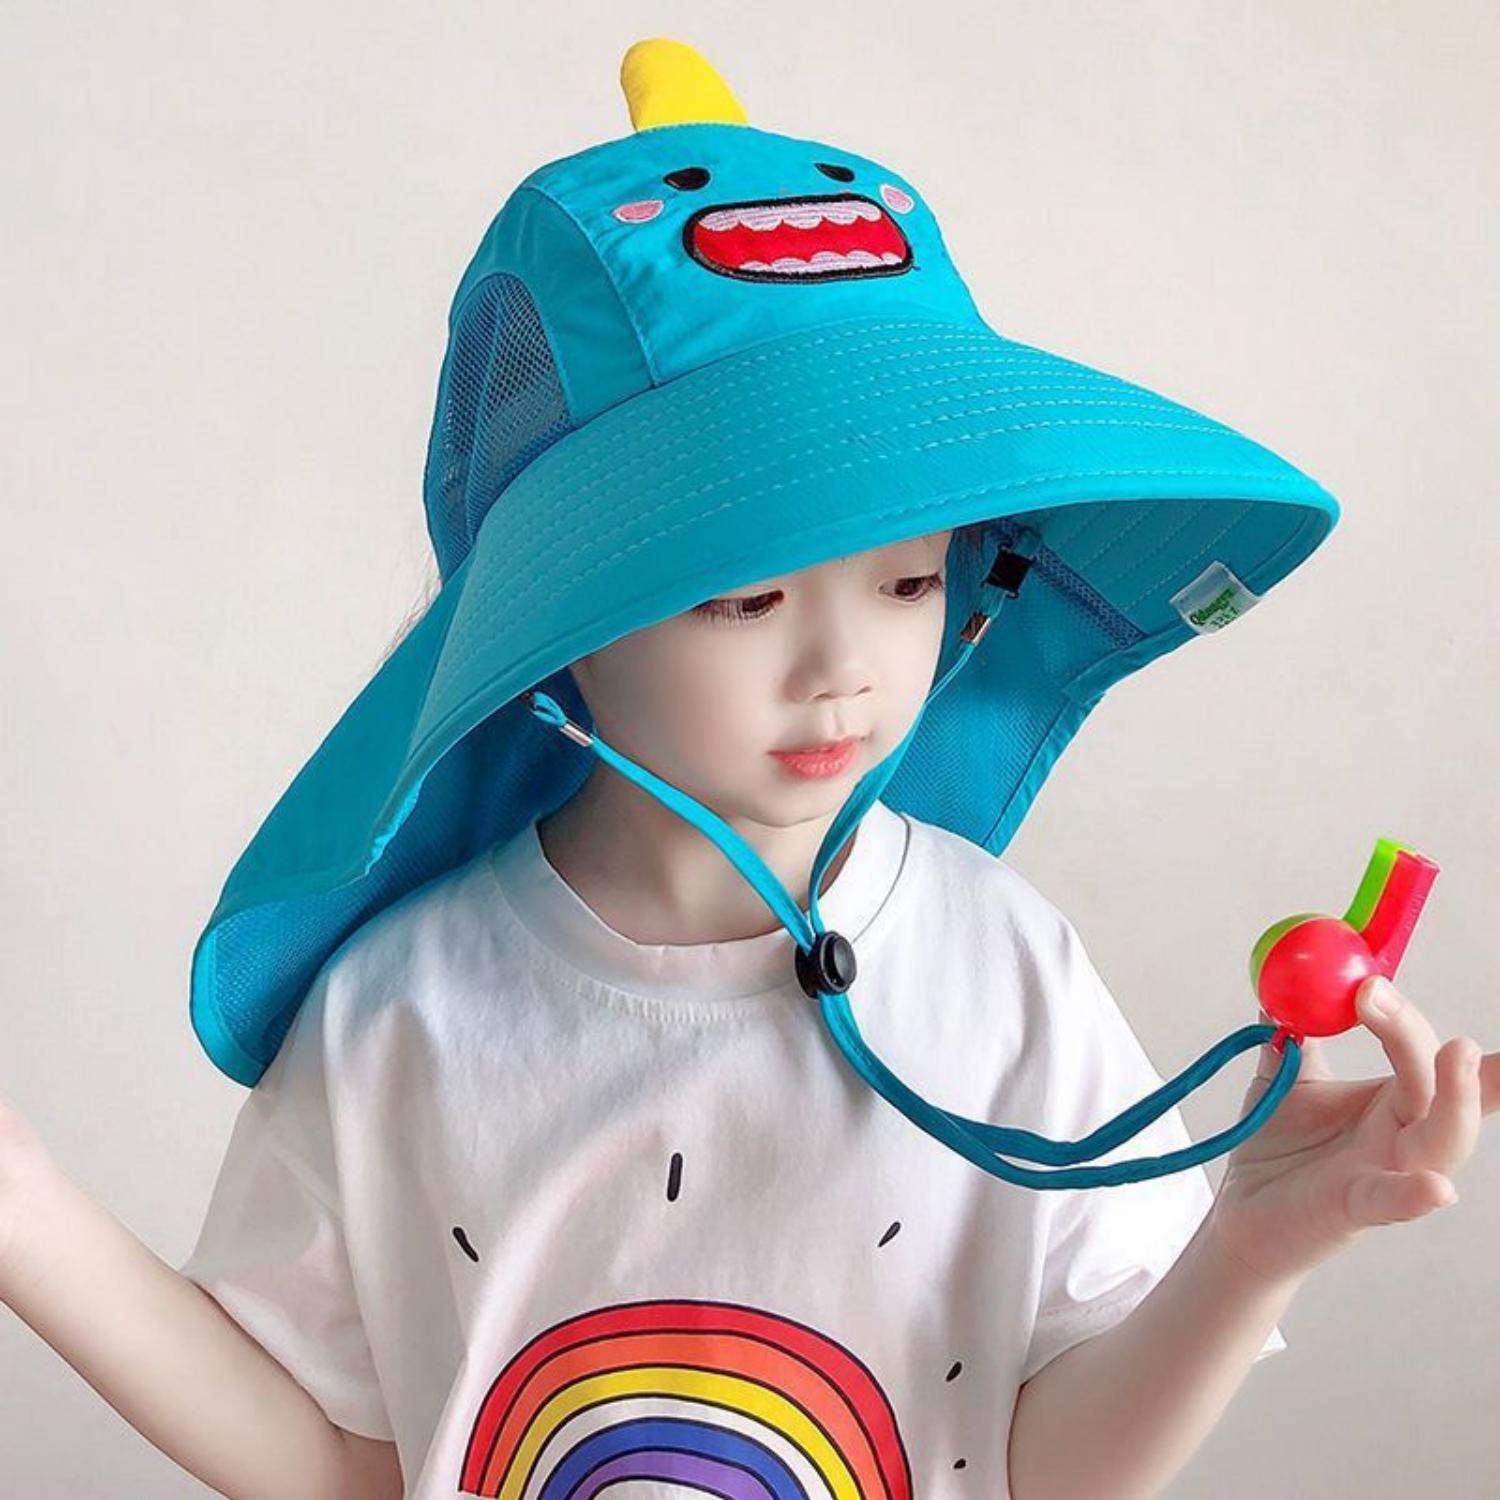 1pc Children's Sunshade Big Brim Breathable Outing Fisherman Hat